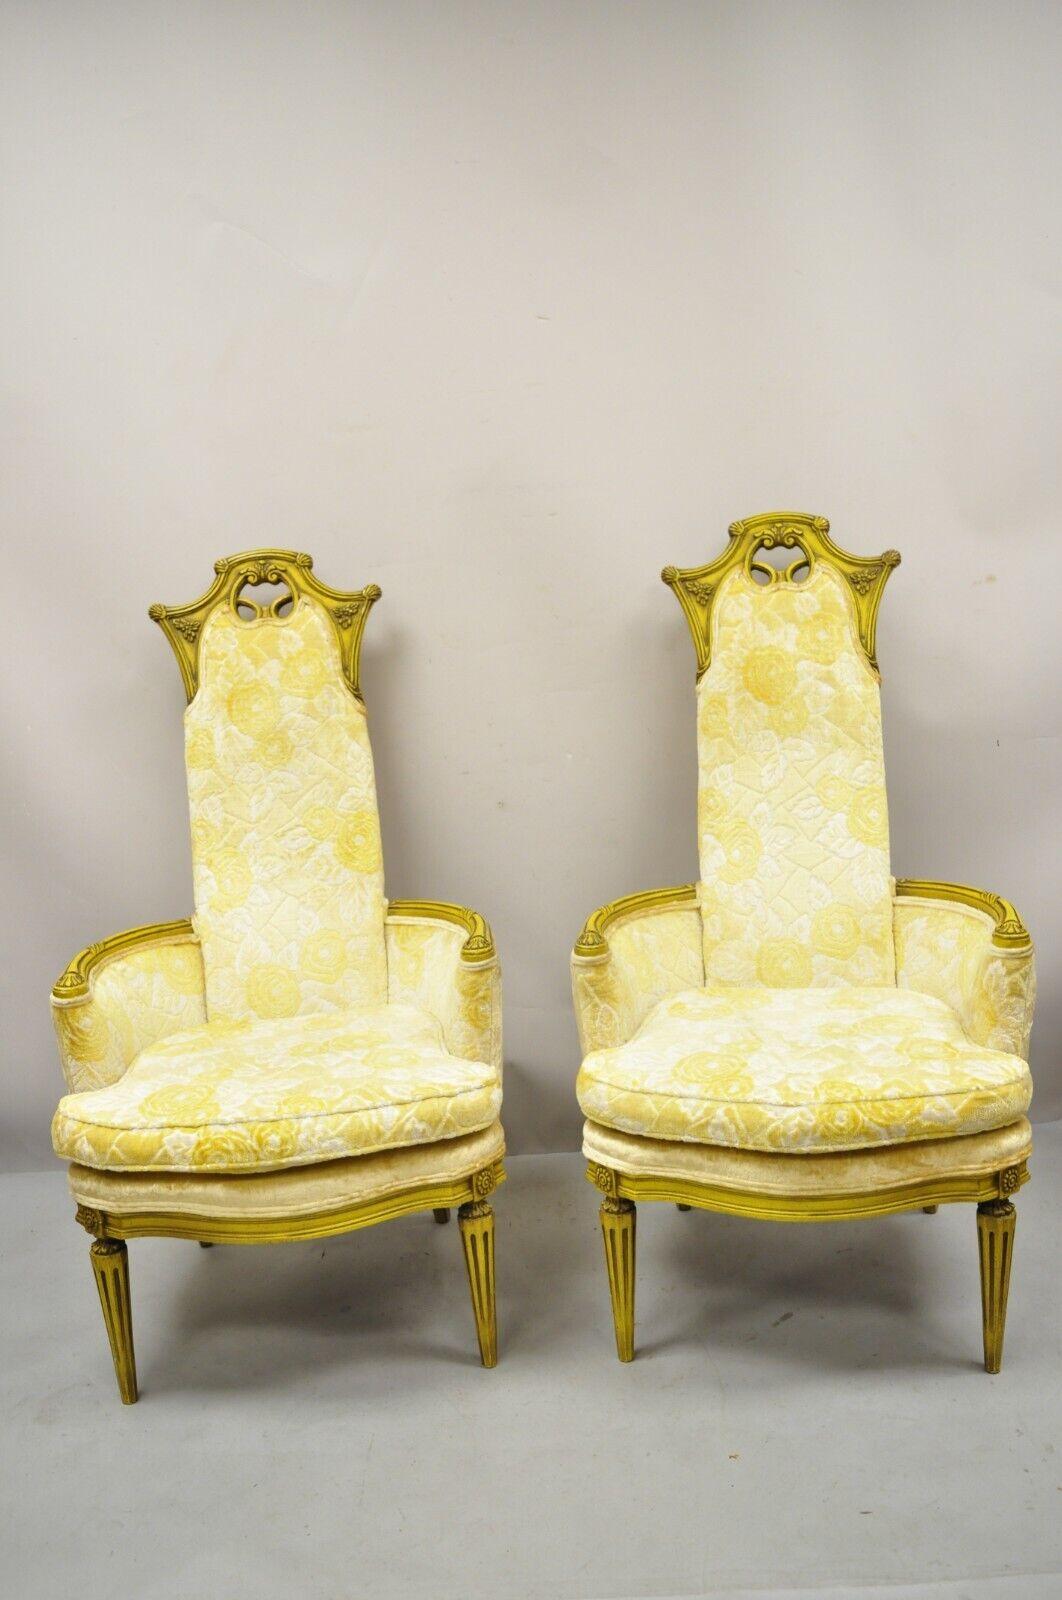 Vintage French Hollywood Regency Yellow Fireside Lounge Chairs - a Pair For Sale 6